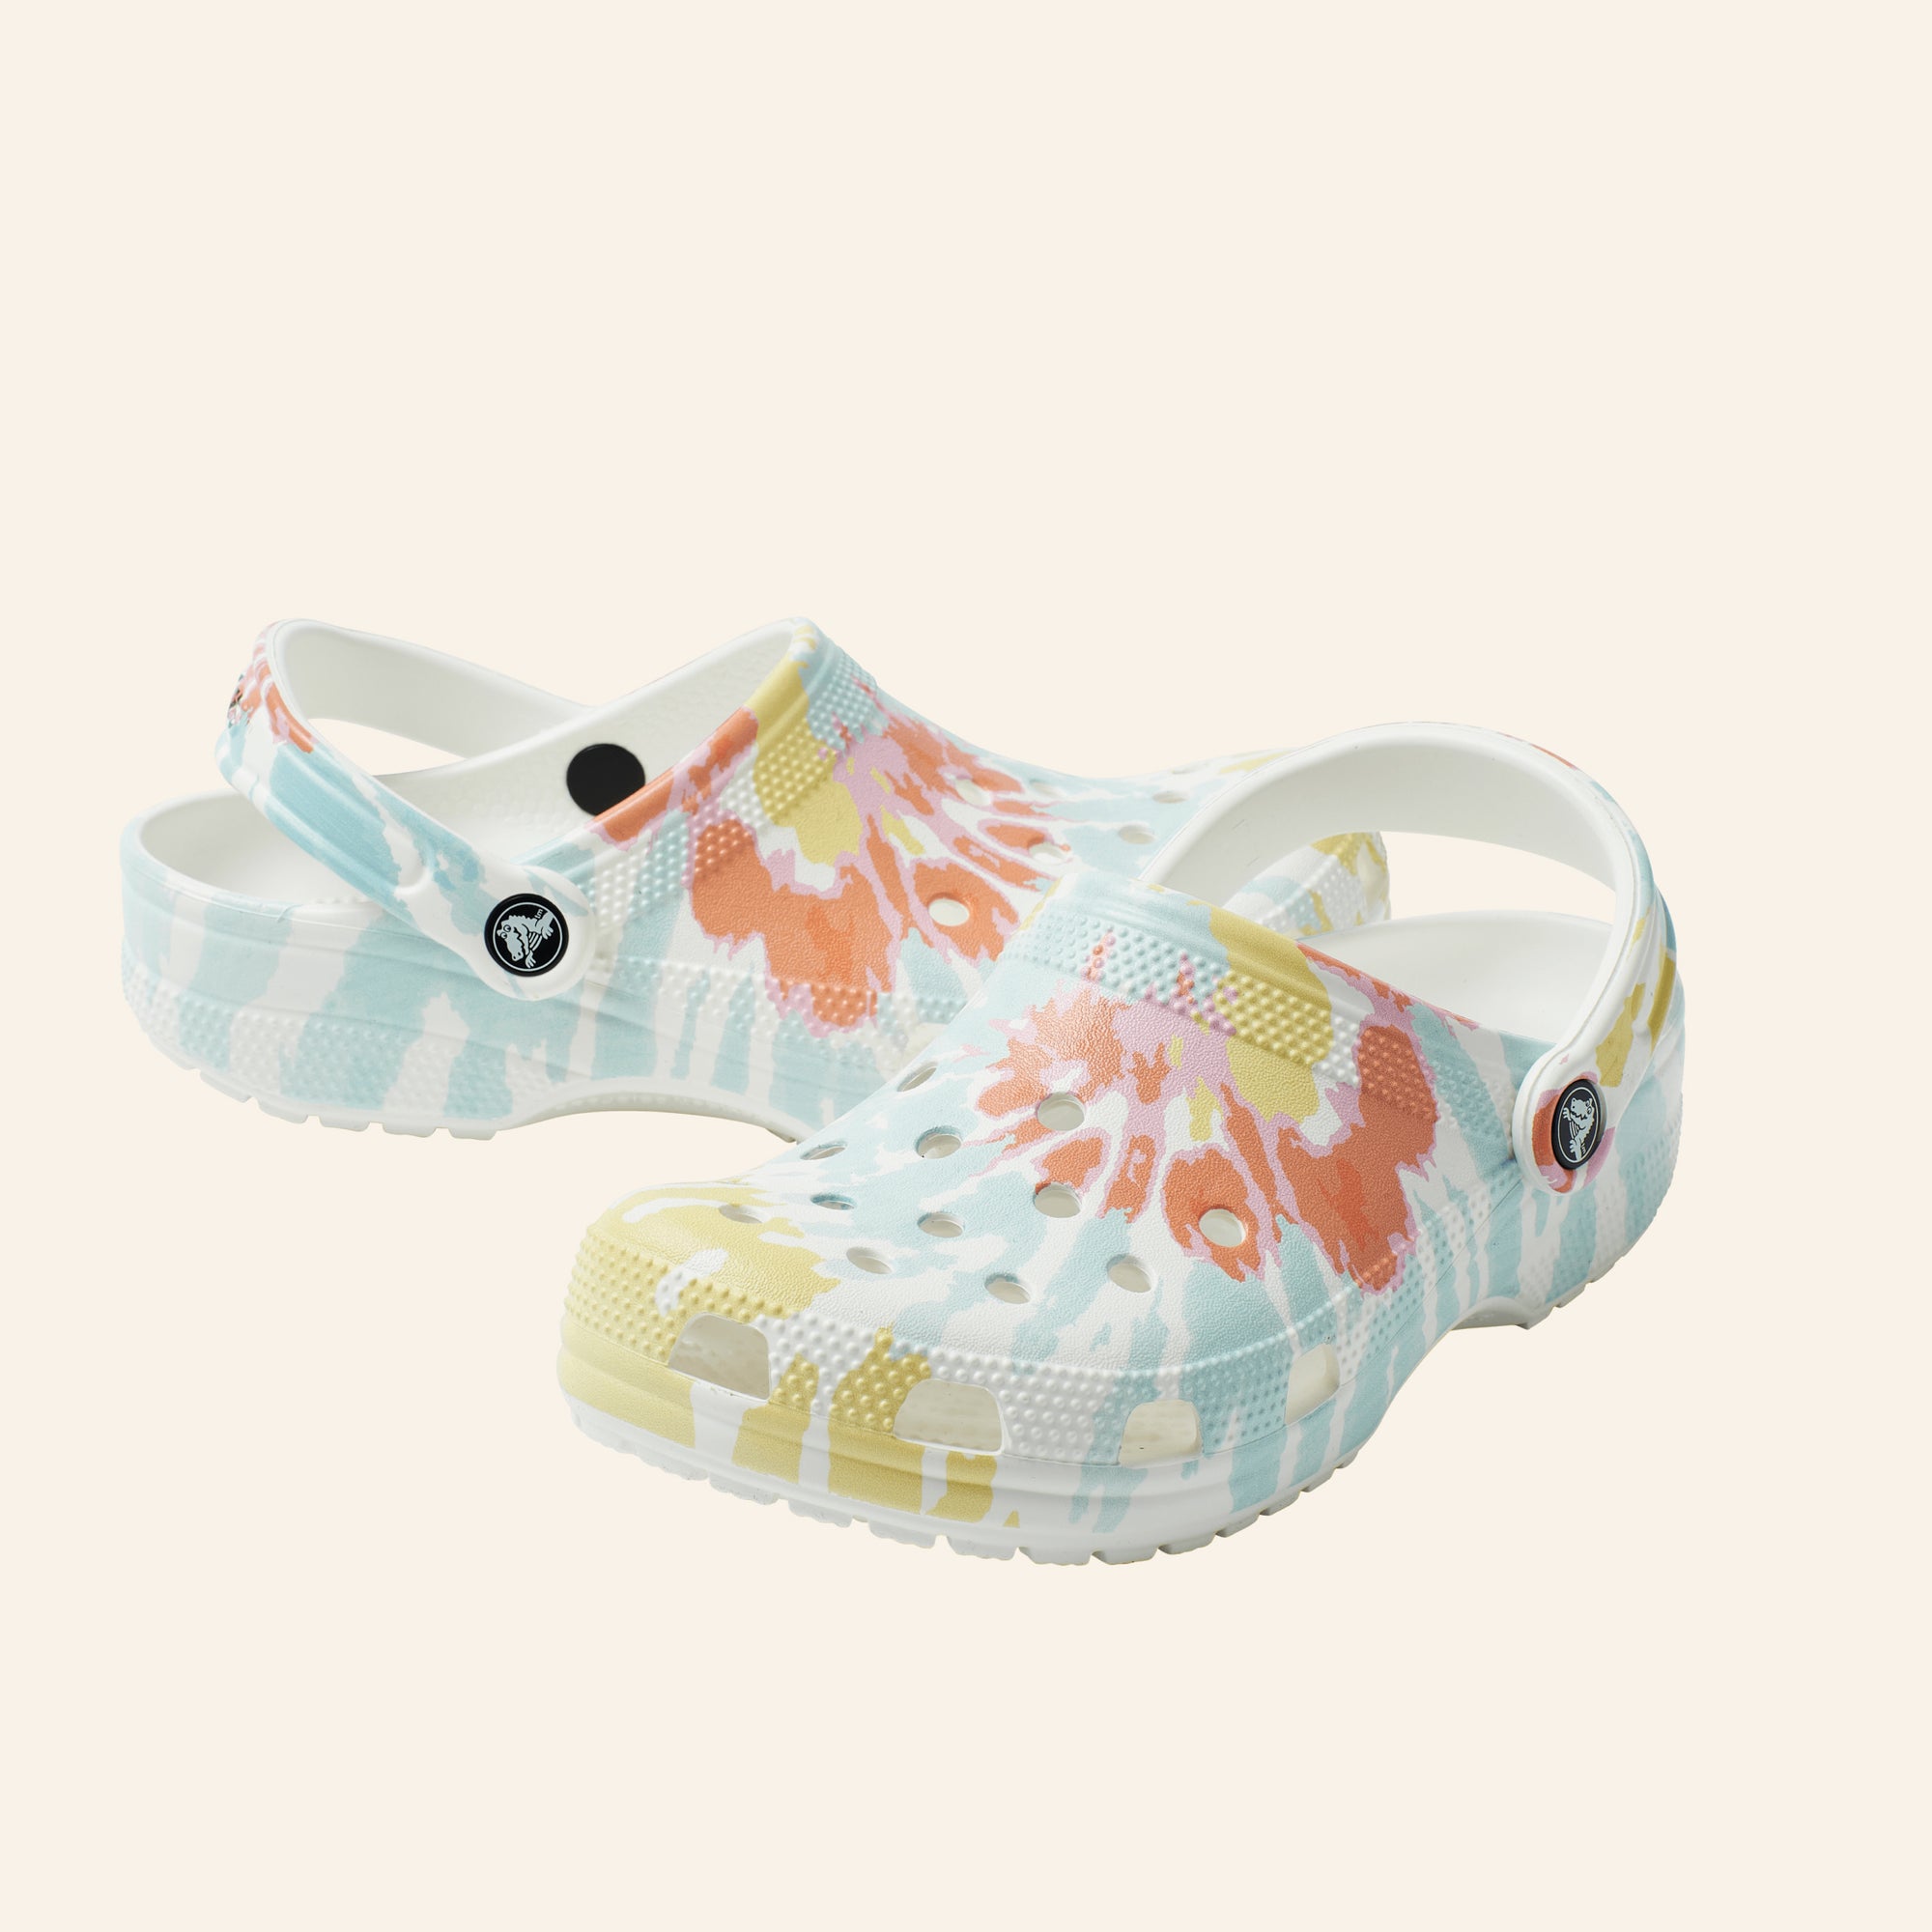 Chargrill Charlie's X Crocs Tie-Die Classic Clog